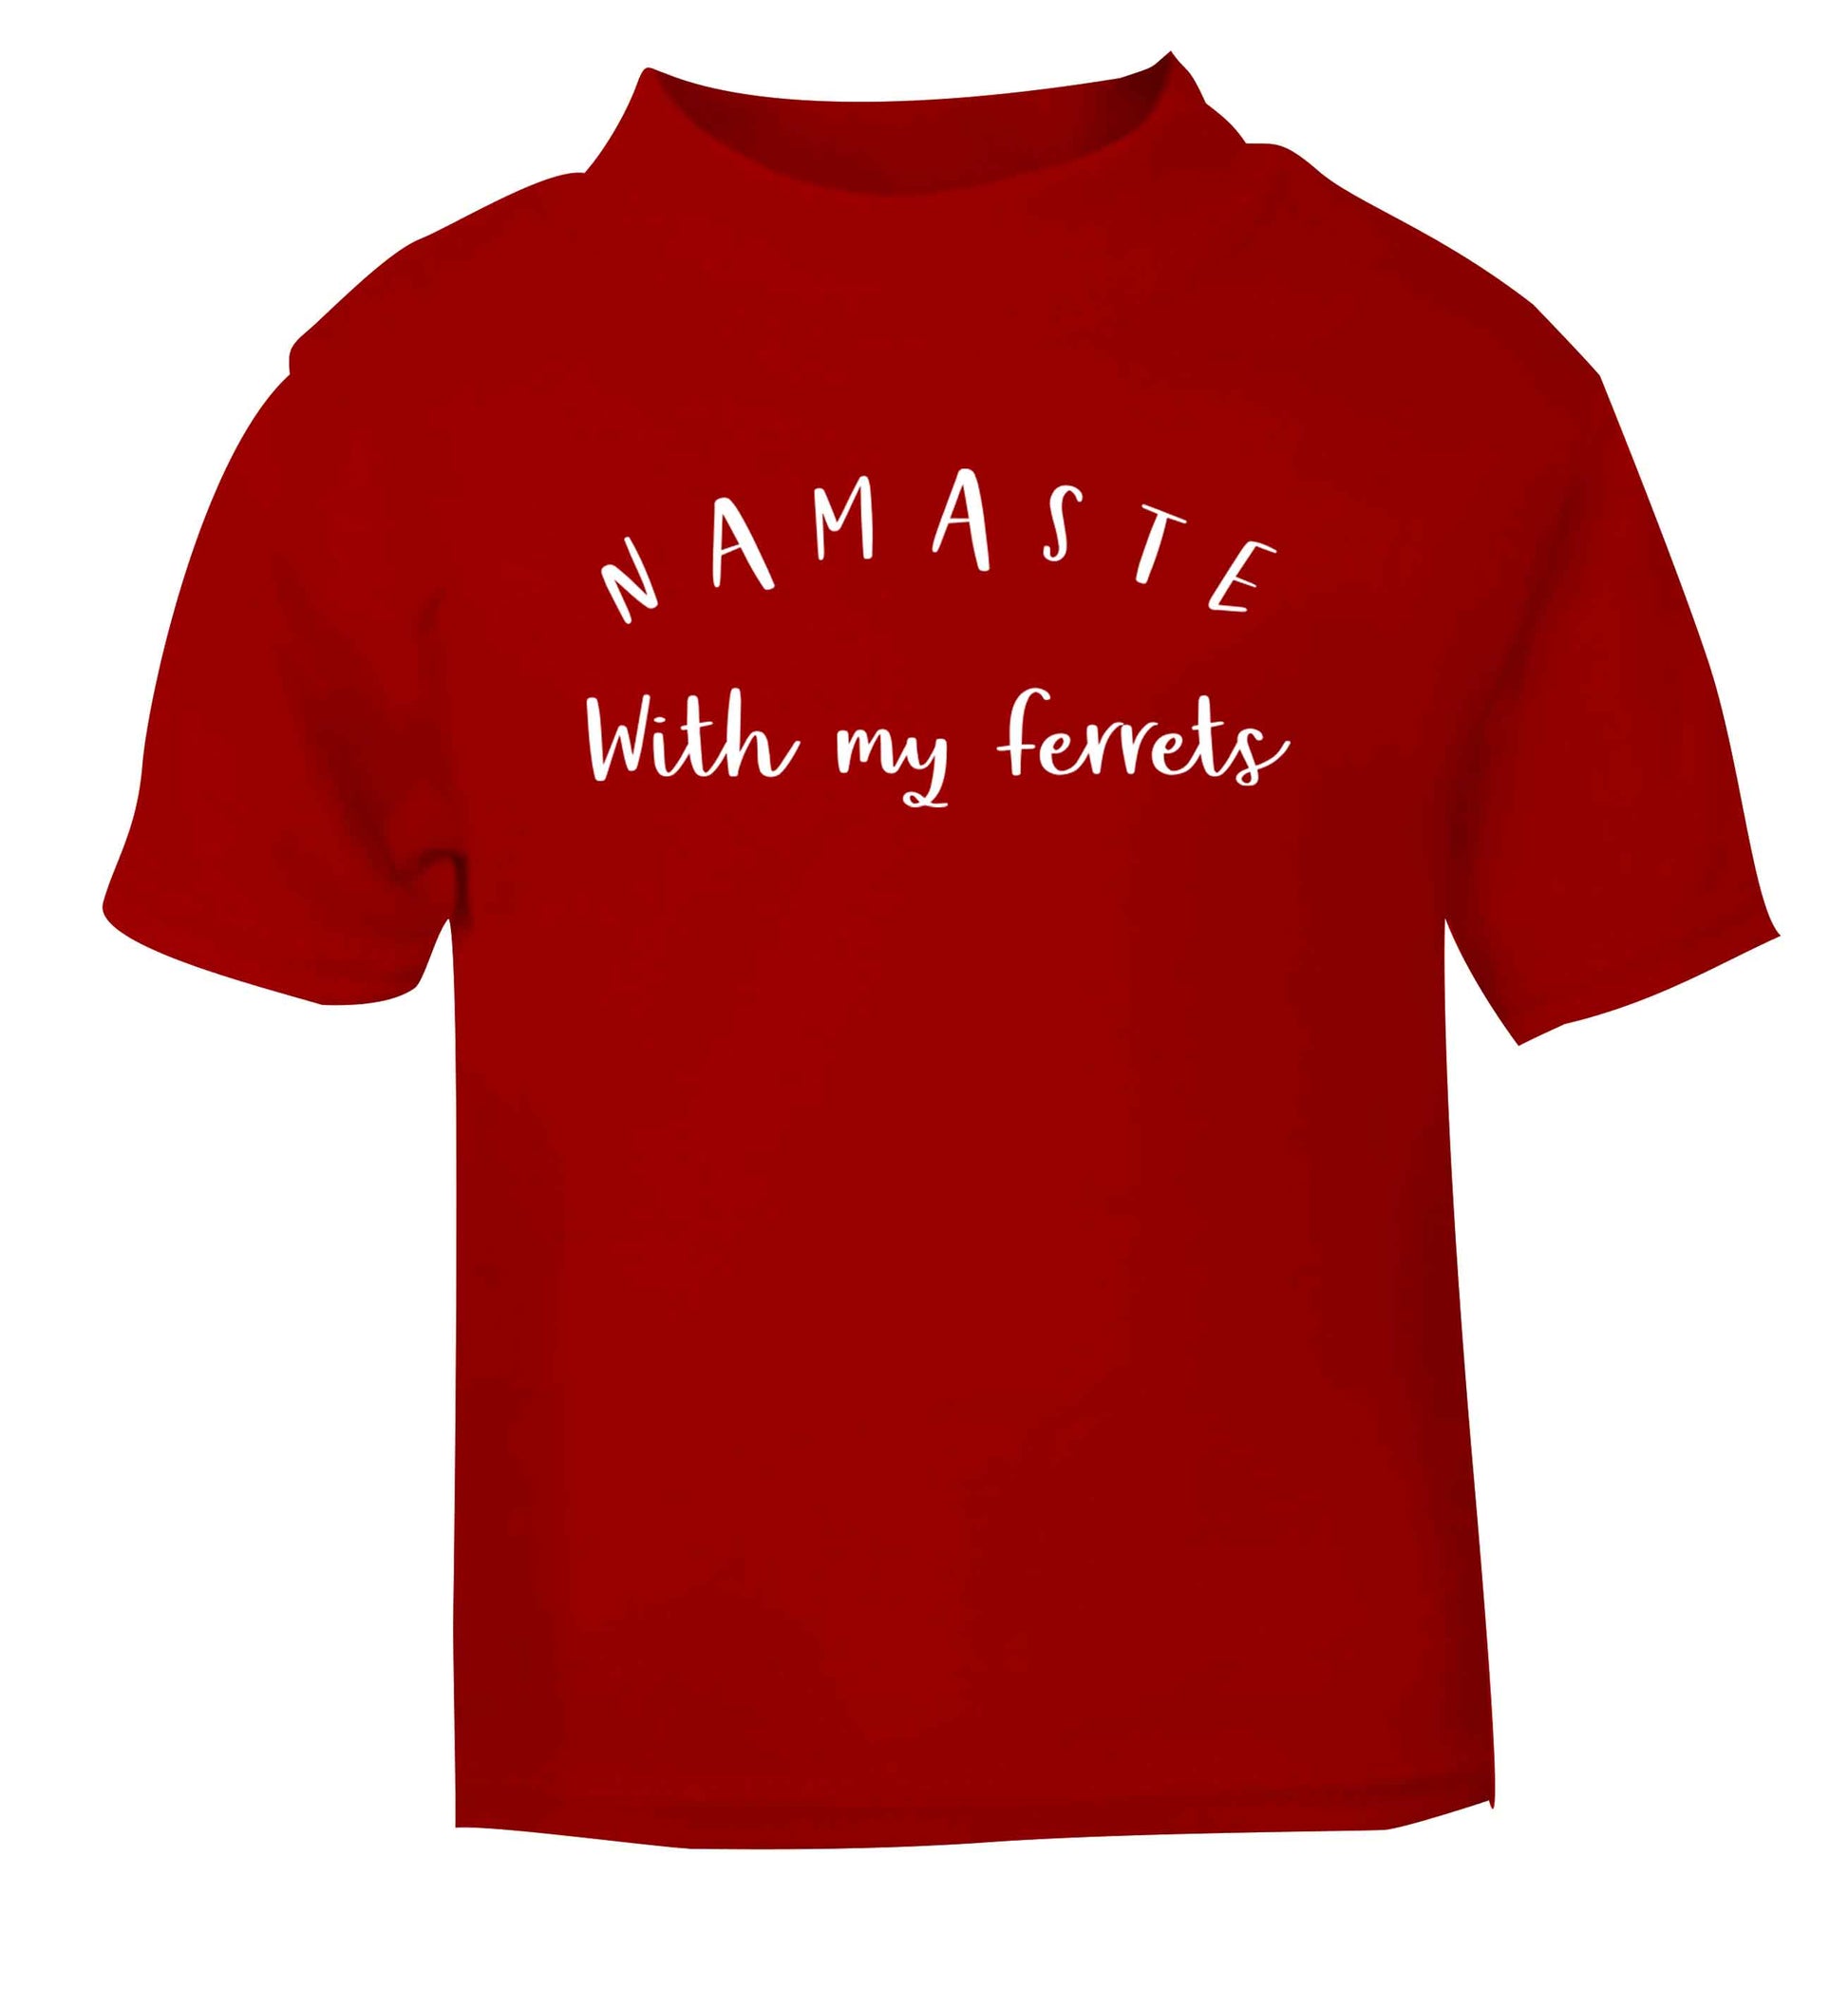 Namaste with my ferrets red Baby Toddler Tshirt 2 Years